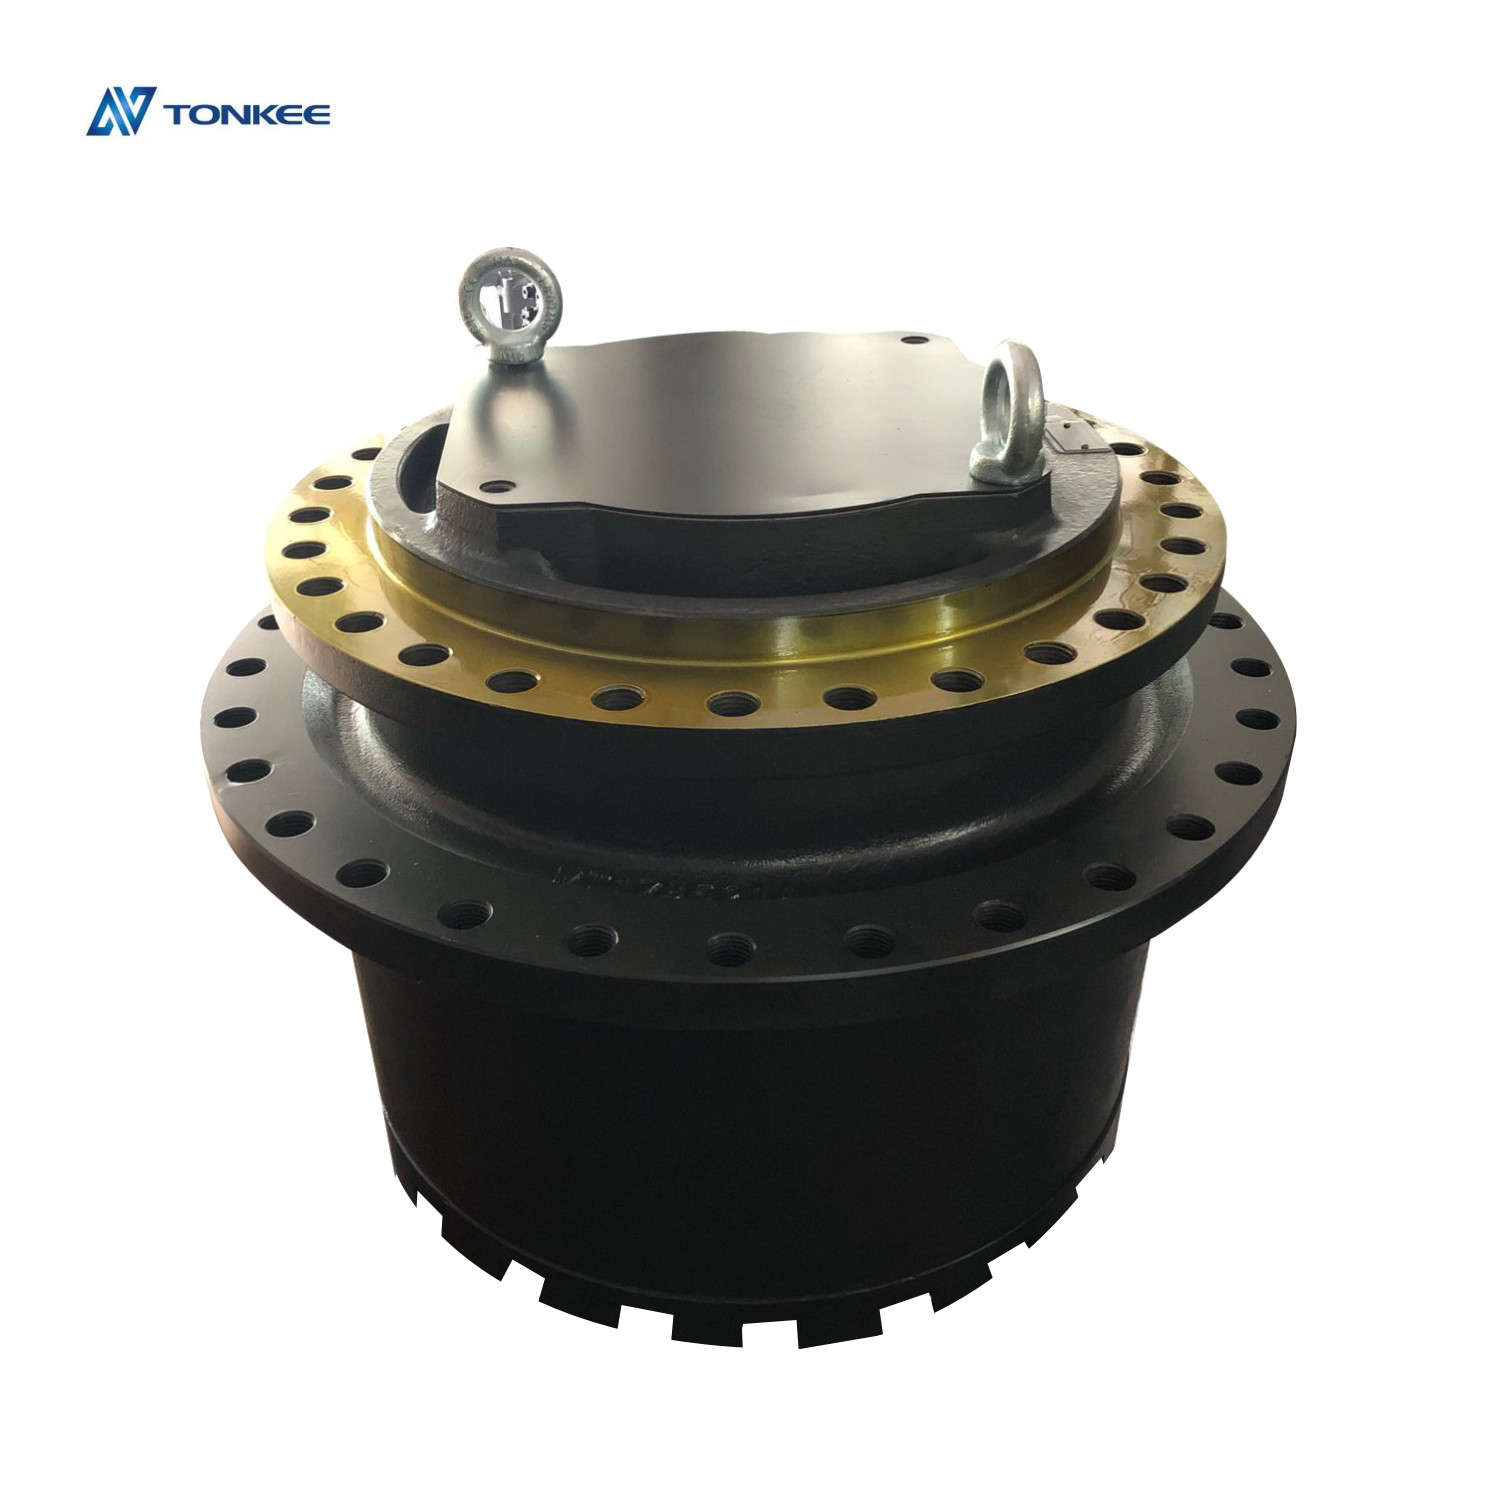 OKUBO WT17BC speed reducer PC750 PC800 PC850-8 SK850 travel gearbox 80 ton excavator final drive group